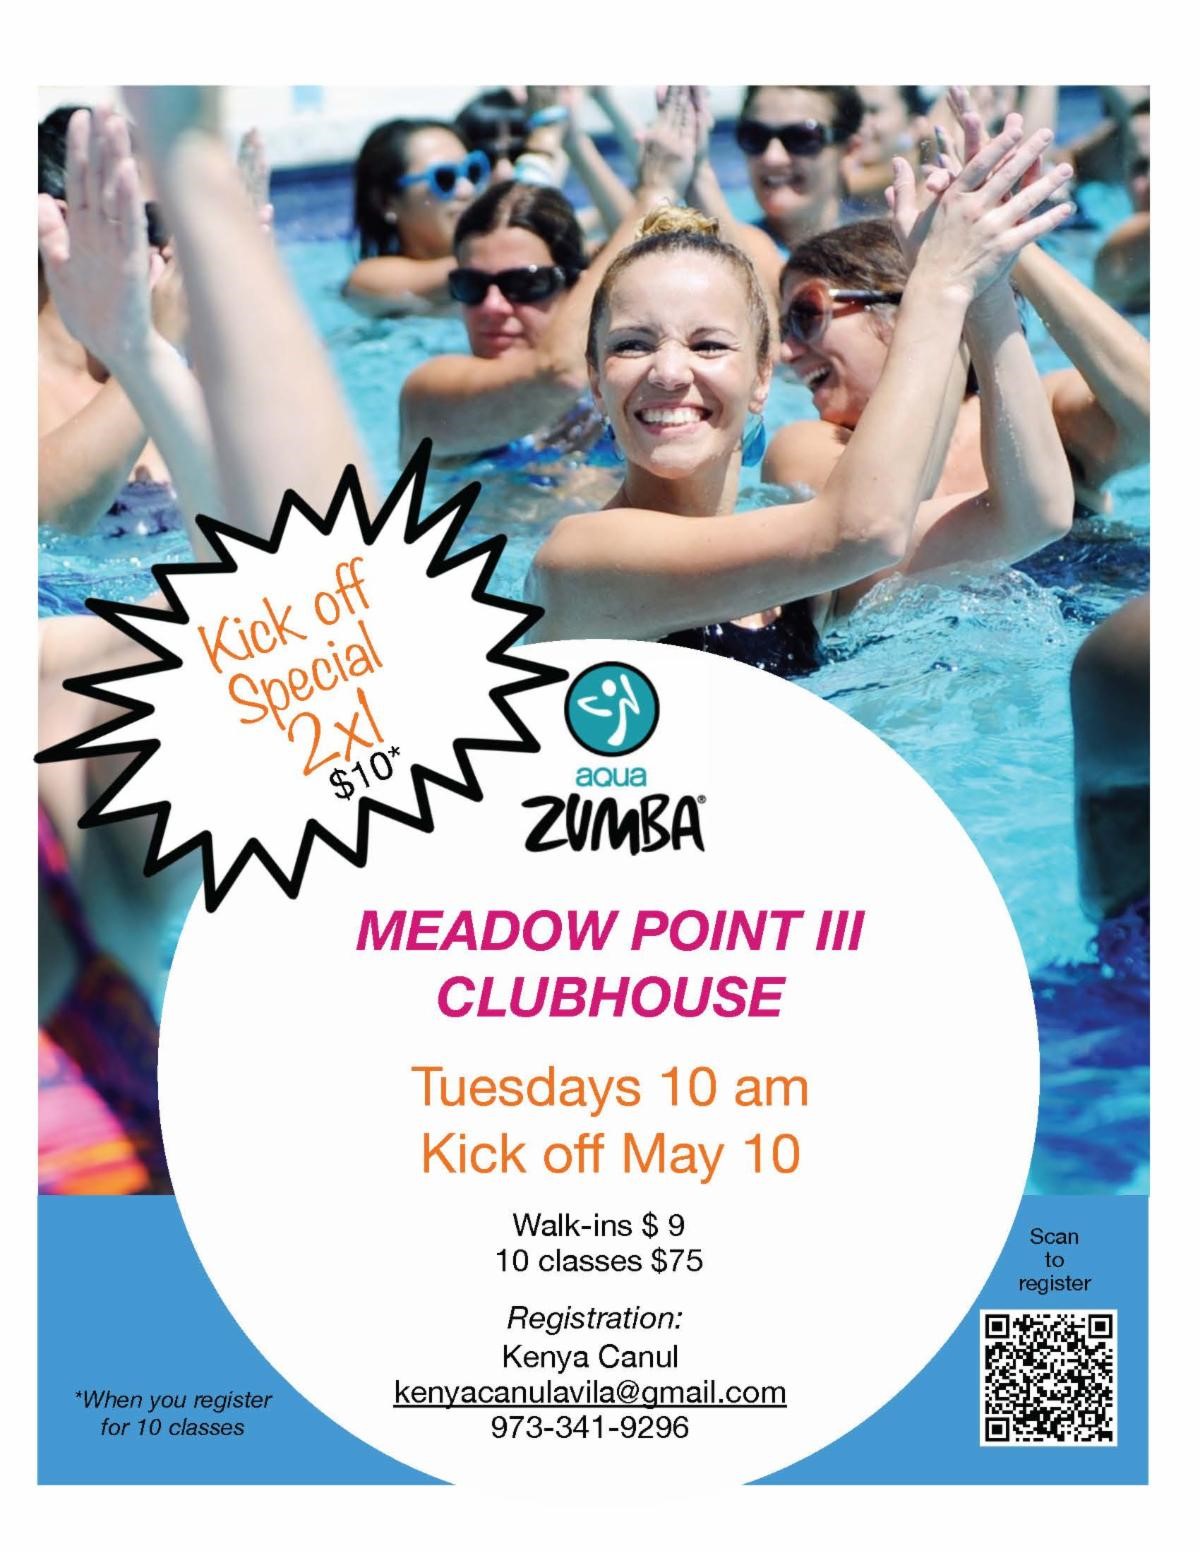 Aqua Zumba MEADOW POINT III CLUBHOUSE Kick of Special 2x1 10* Tuesdays 10 am Kick off May 10 Walk-ins $ 9 10 classes $75 Registration: Kenya Canul kenyacanulavila@gmail.com 973-341-9296 *When you register for 10 Classes